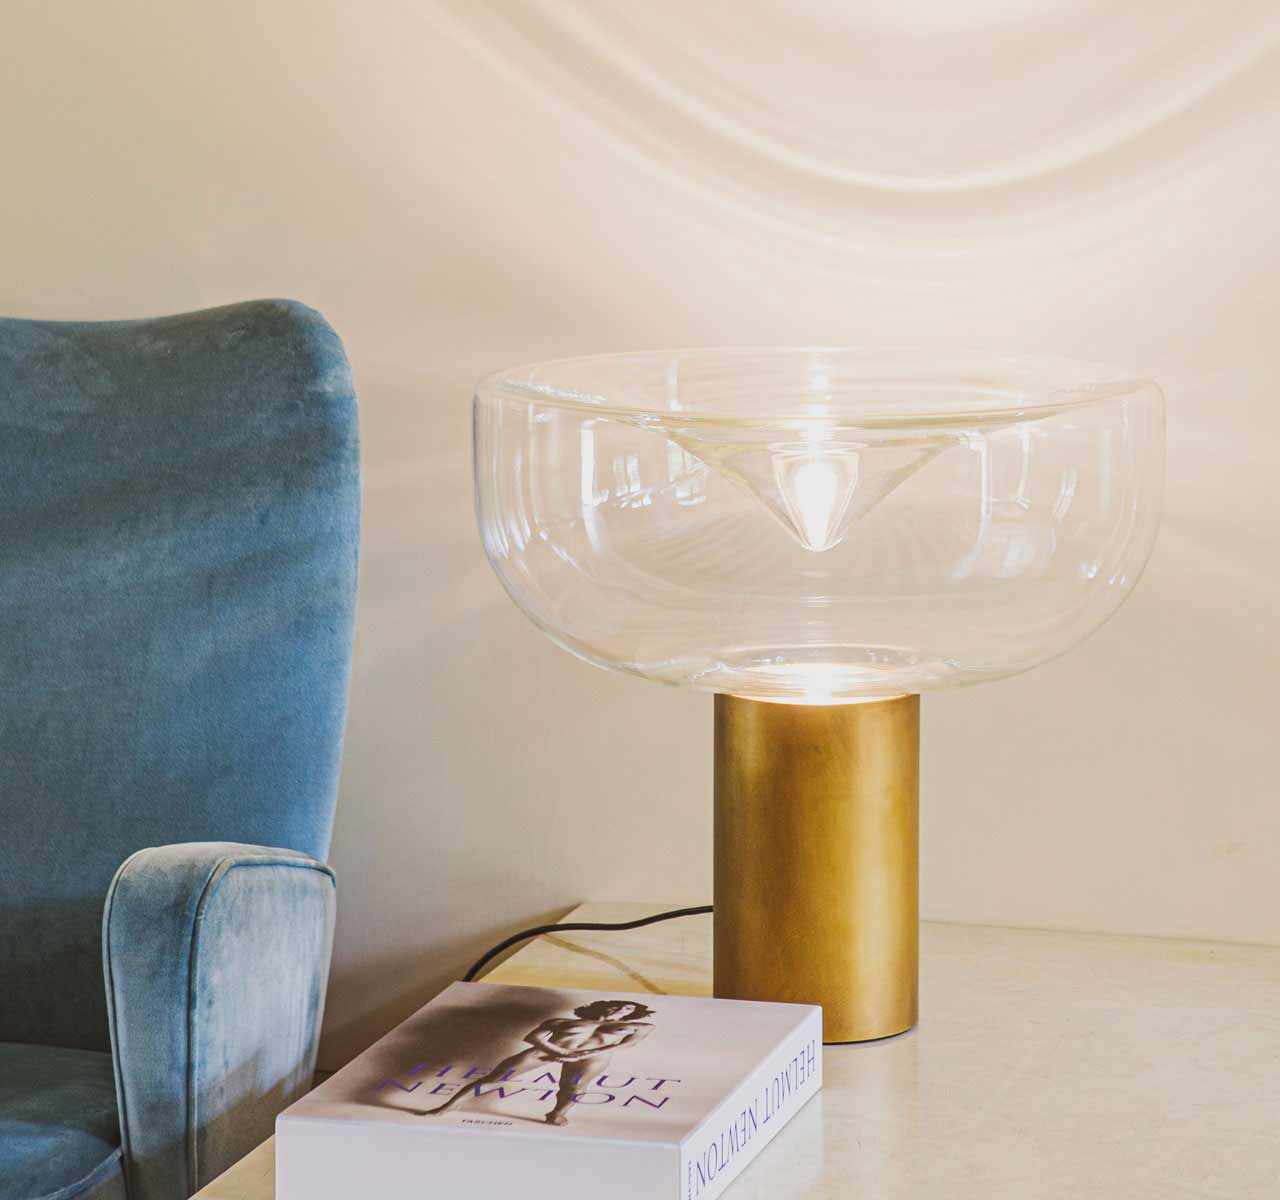 Aella table lamp with chrome brass base and transparent Murano blown glass. Toso, Massari & Associates design. Online shopping and free home delivery.